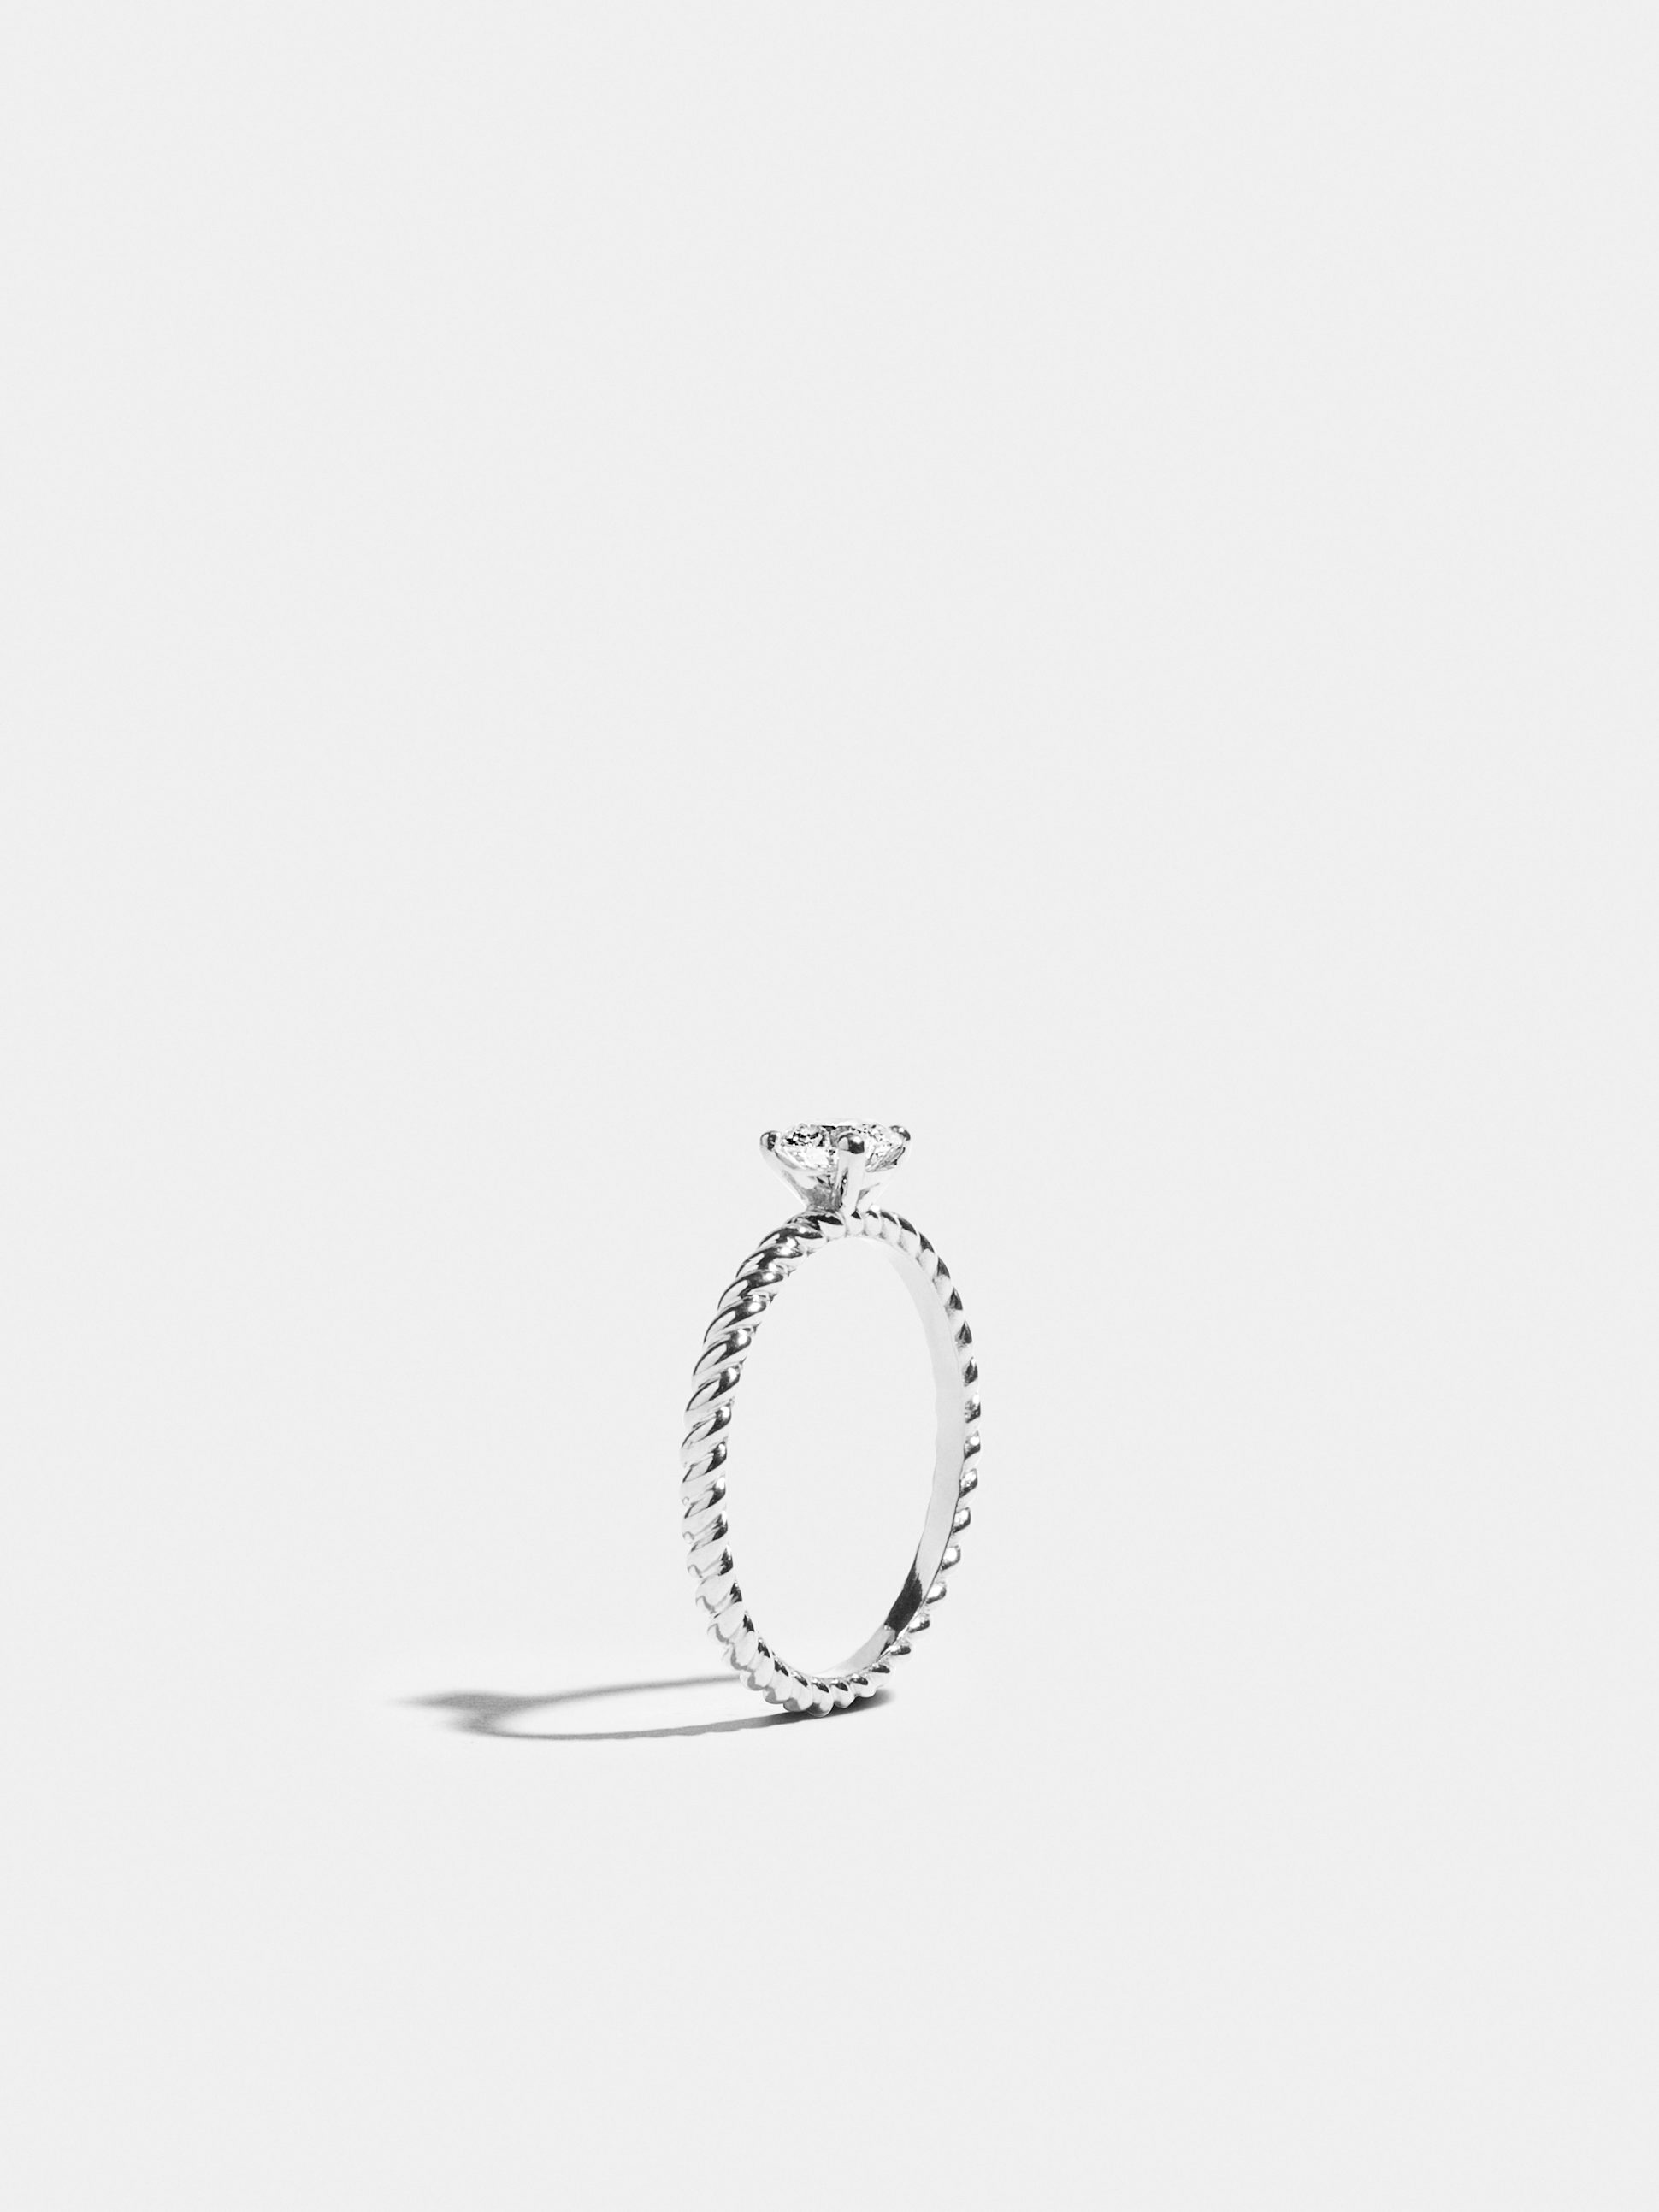 Solitaire Anagramme twisted in white gold 18k Fairmined ethical set with a 0.50 carat synthetic brilliant cut diamond | JEM Jewellery Ethically Minded